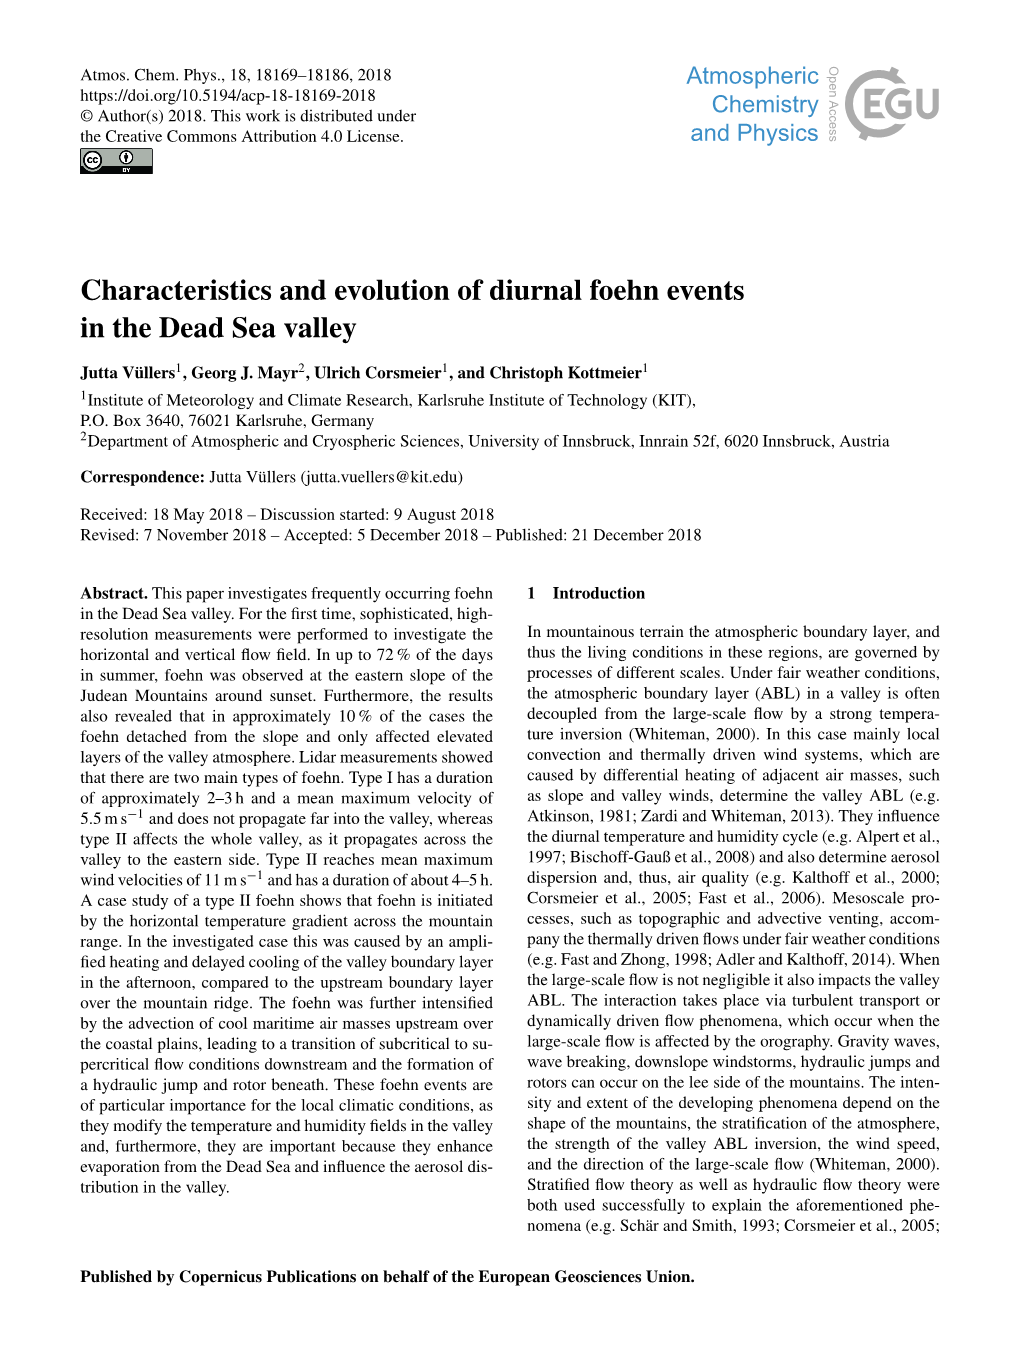 Characteristics and Evolution of Diurnal Foehn Events in the Dead Sea Valley